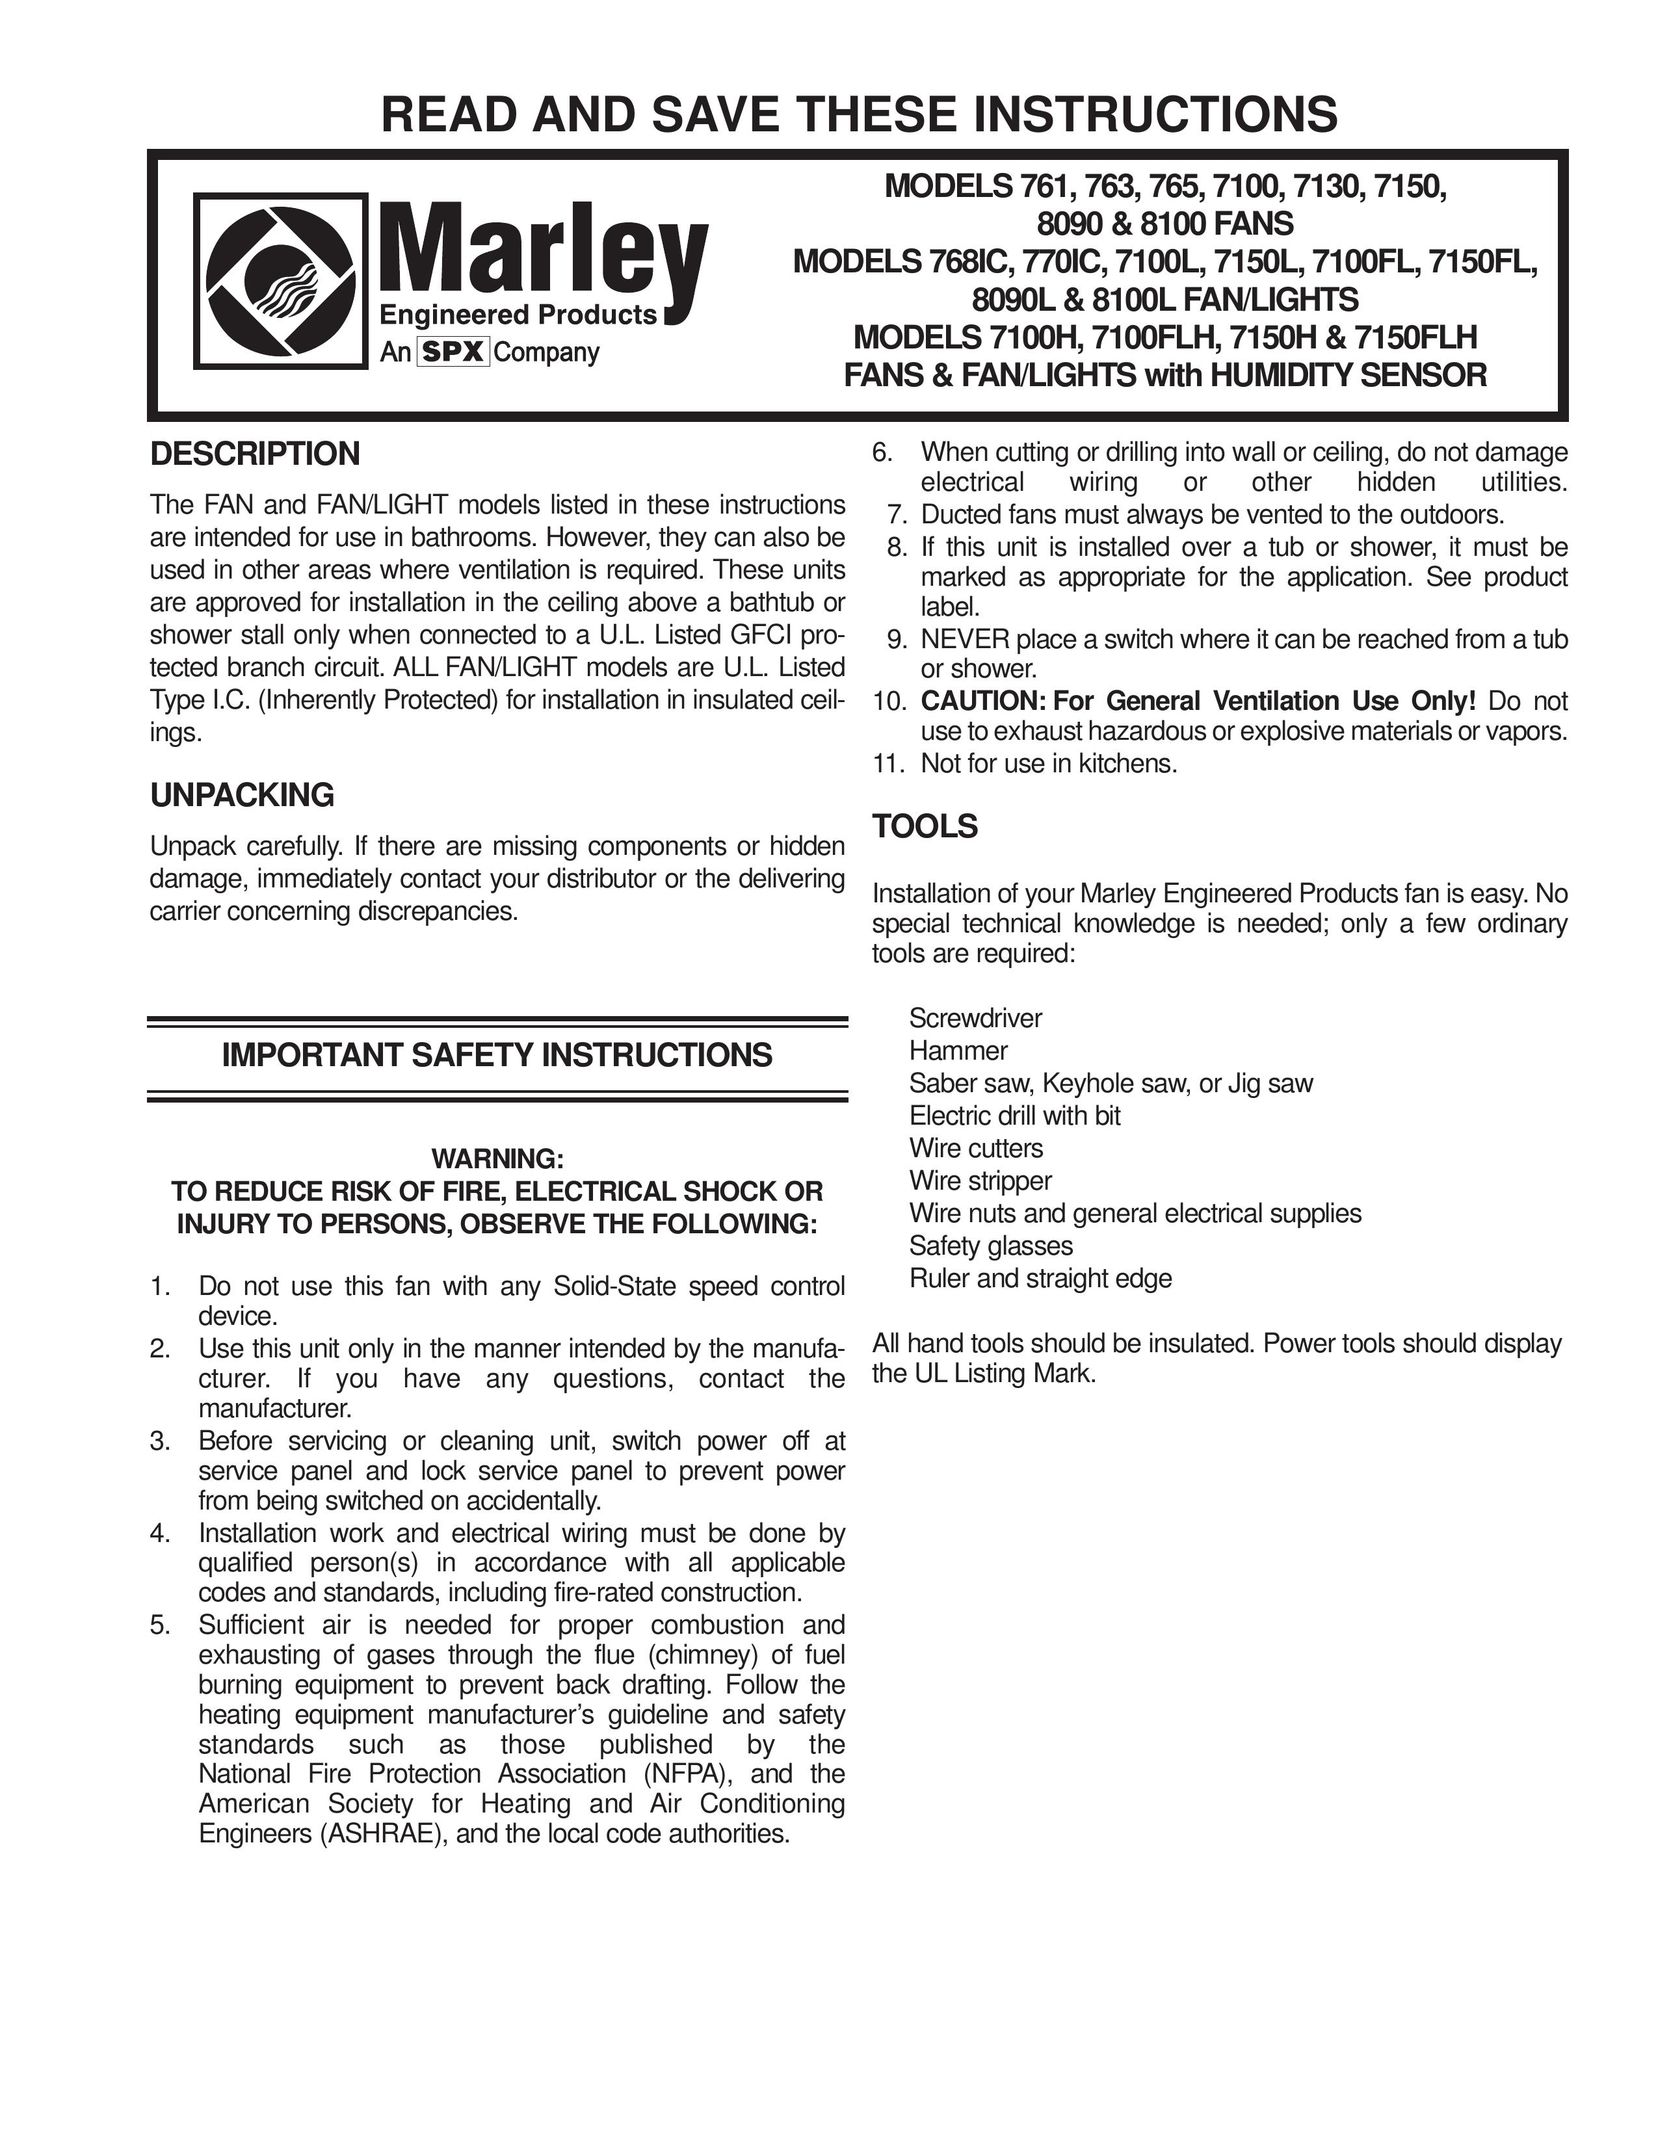 Marley Engineered Products 761 Fan User Manual